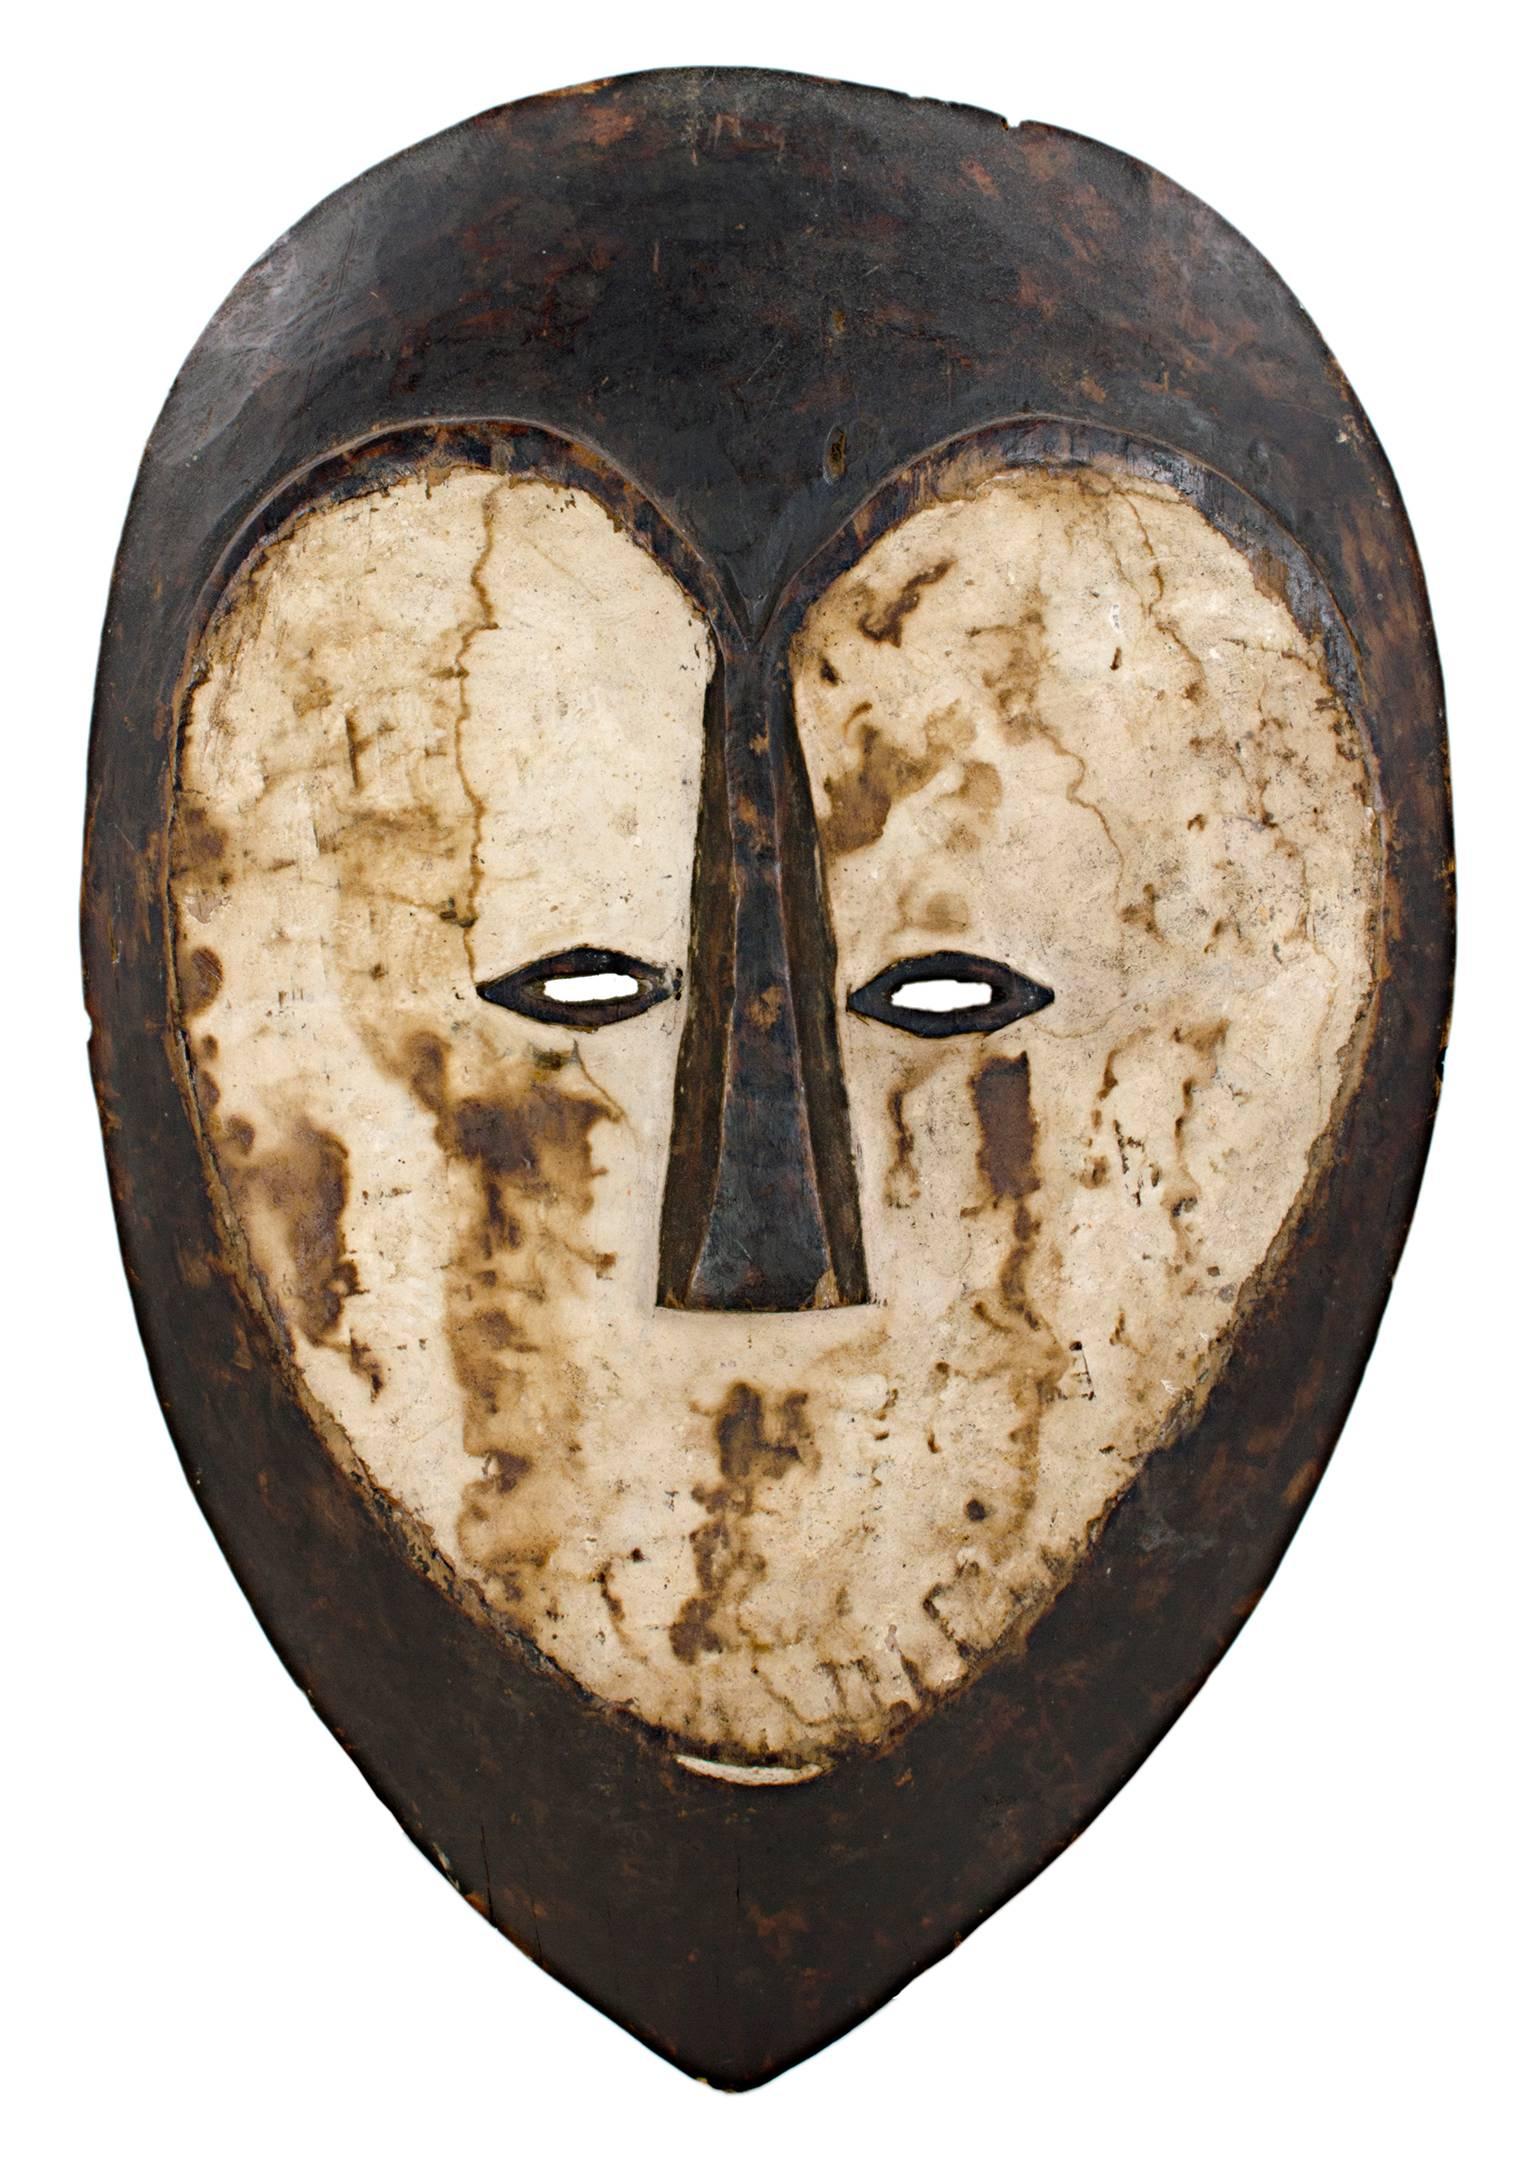 "Messenger Mask Lega - Zaire, " Wood & Clay created in Africa circa 1925 - Sculpture by Unknown